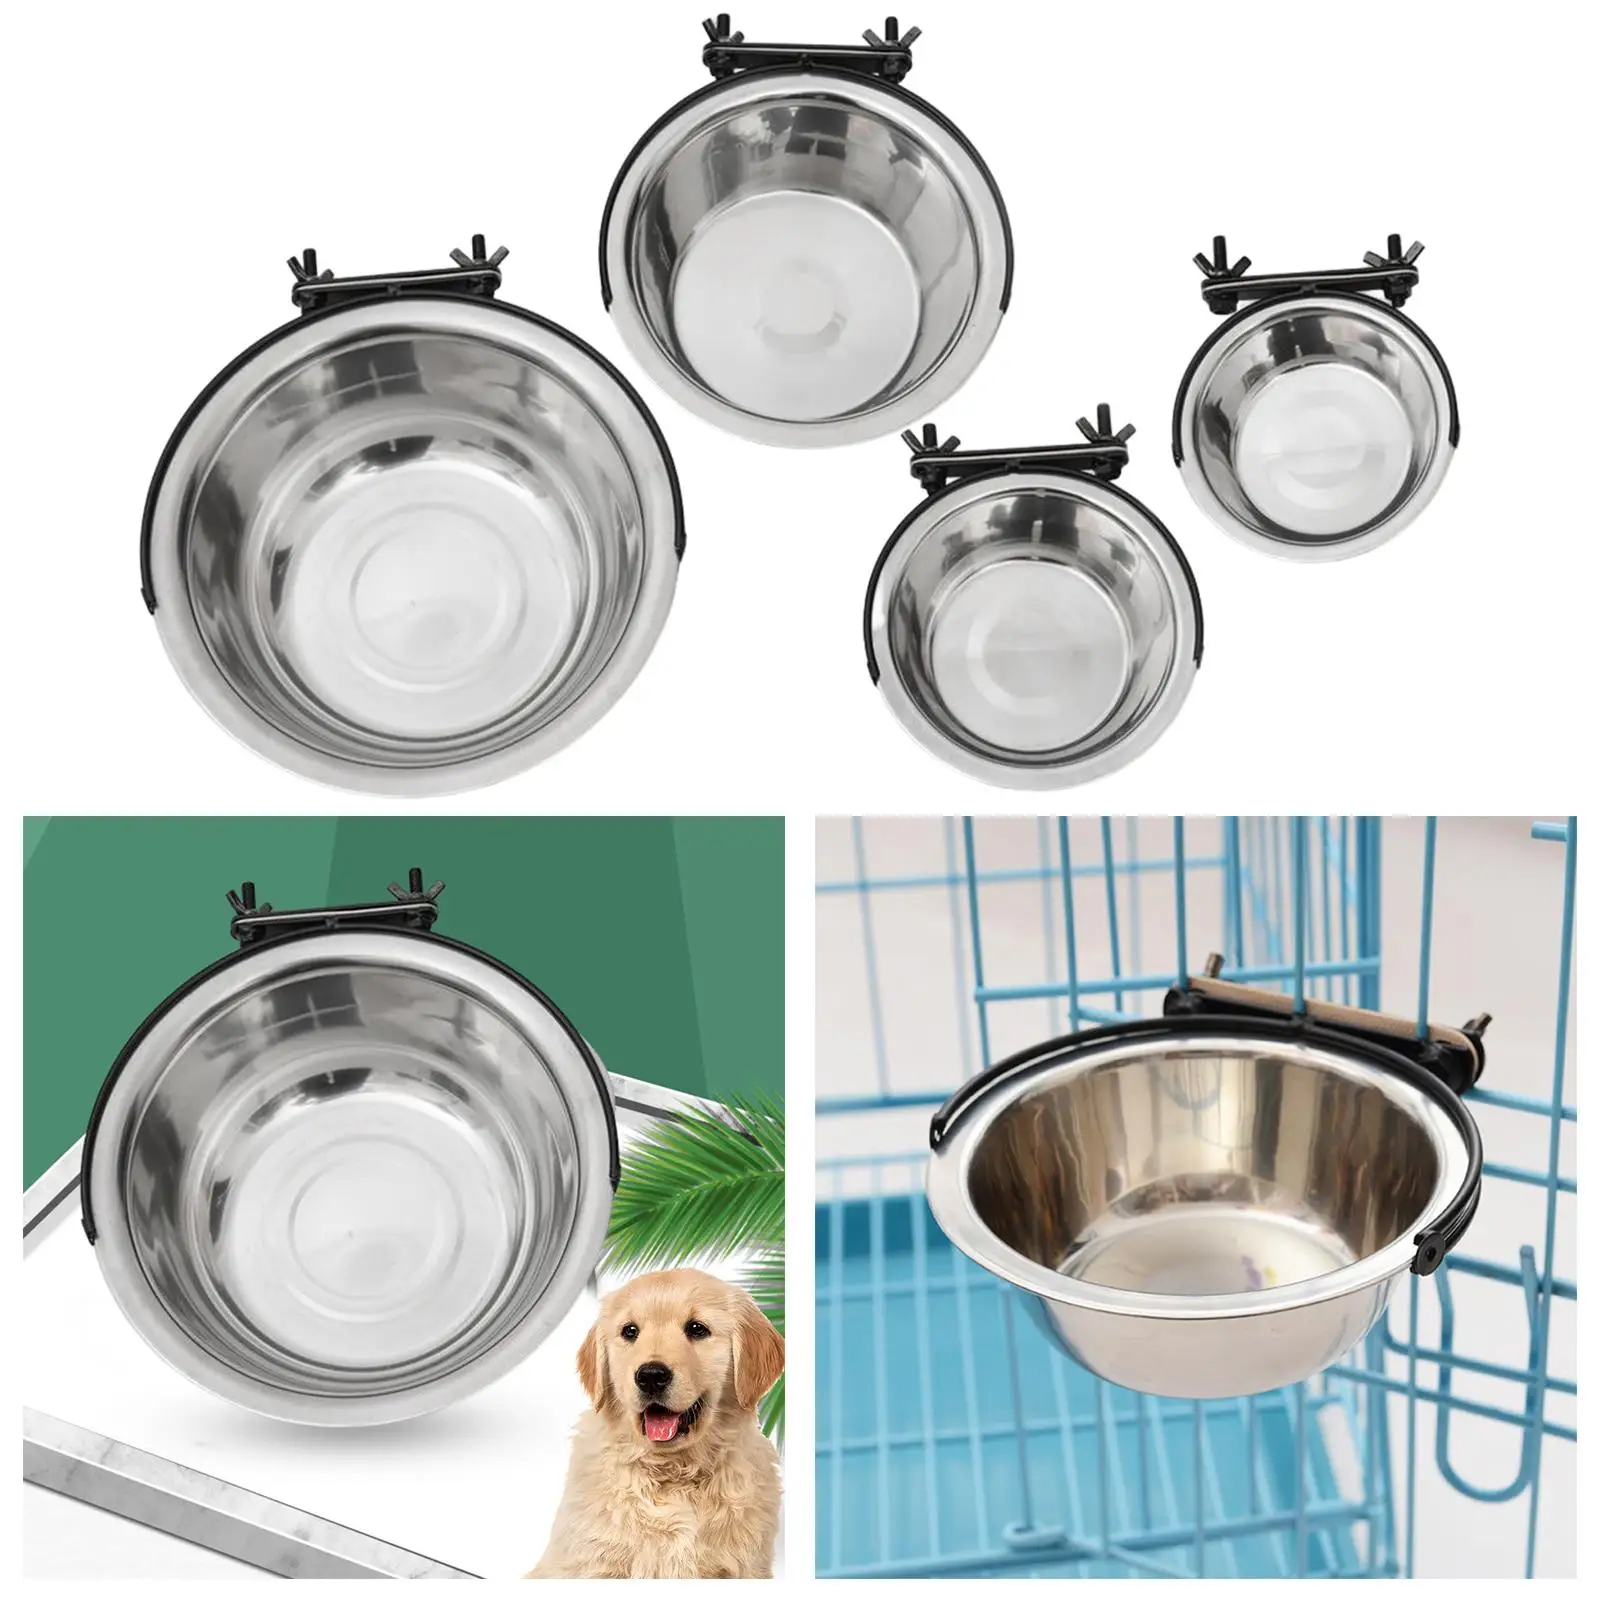 Hanging Pet Bowl Pet Feeding Dish Bowl Stainless Steel with Fixed Bowl Card Slot Cage Water Dish Non Spill Dog Bowls for Rabbit